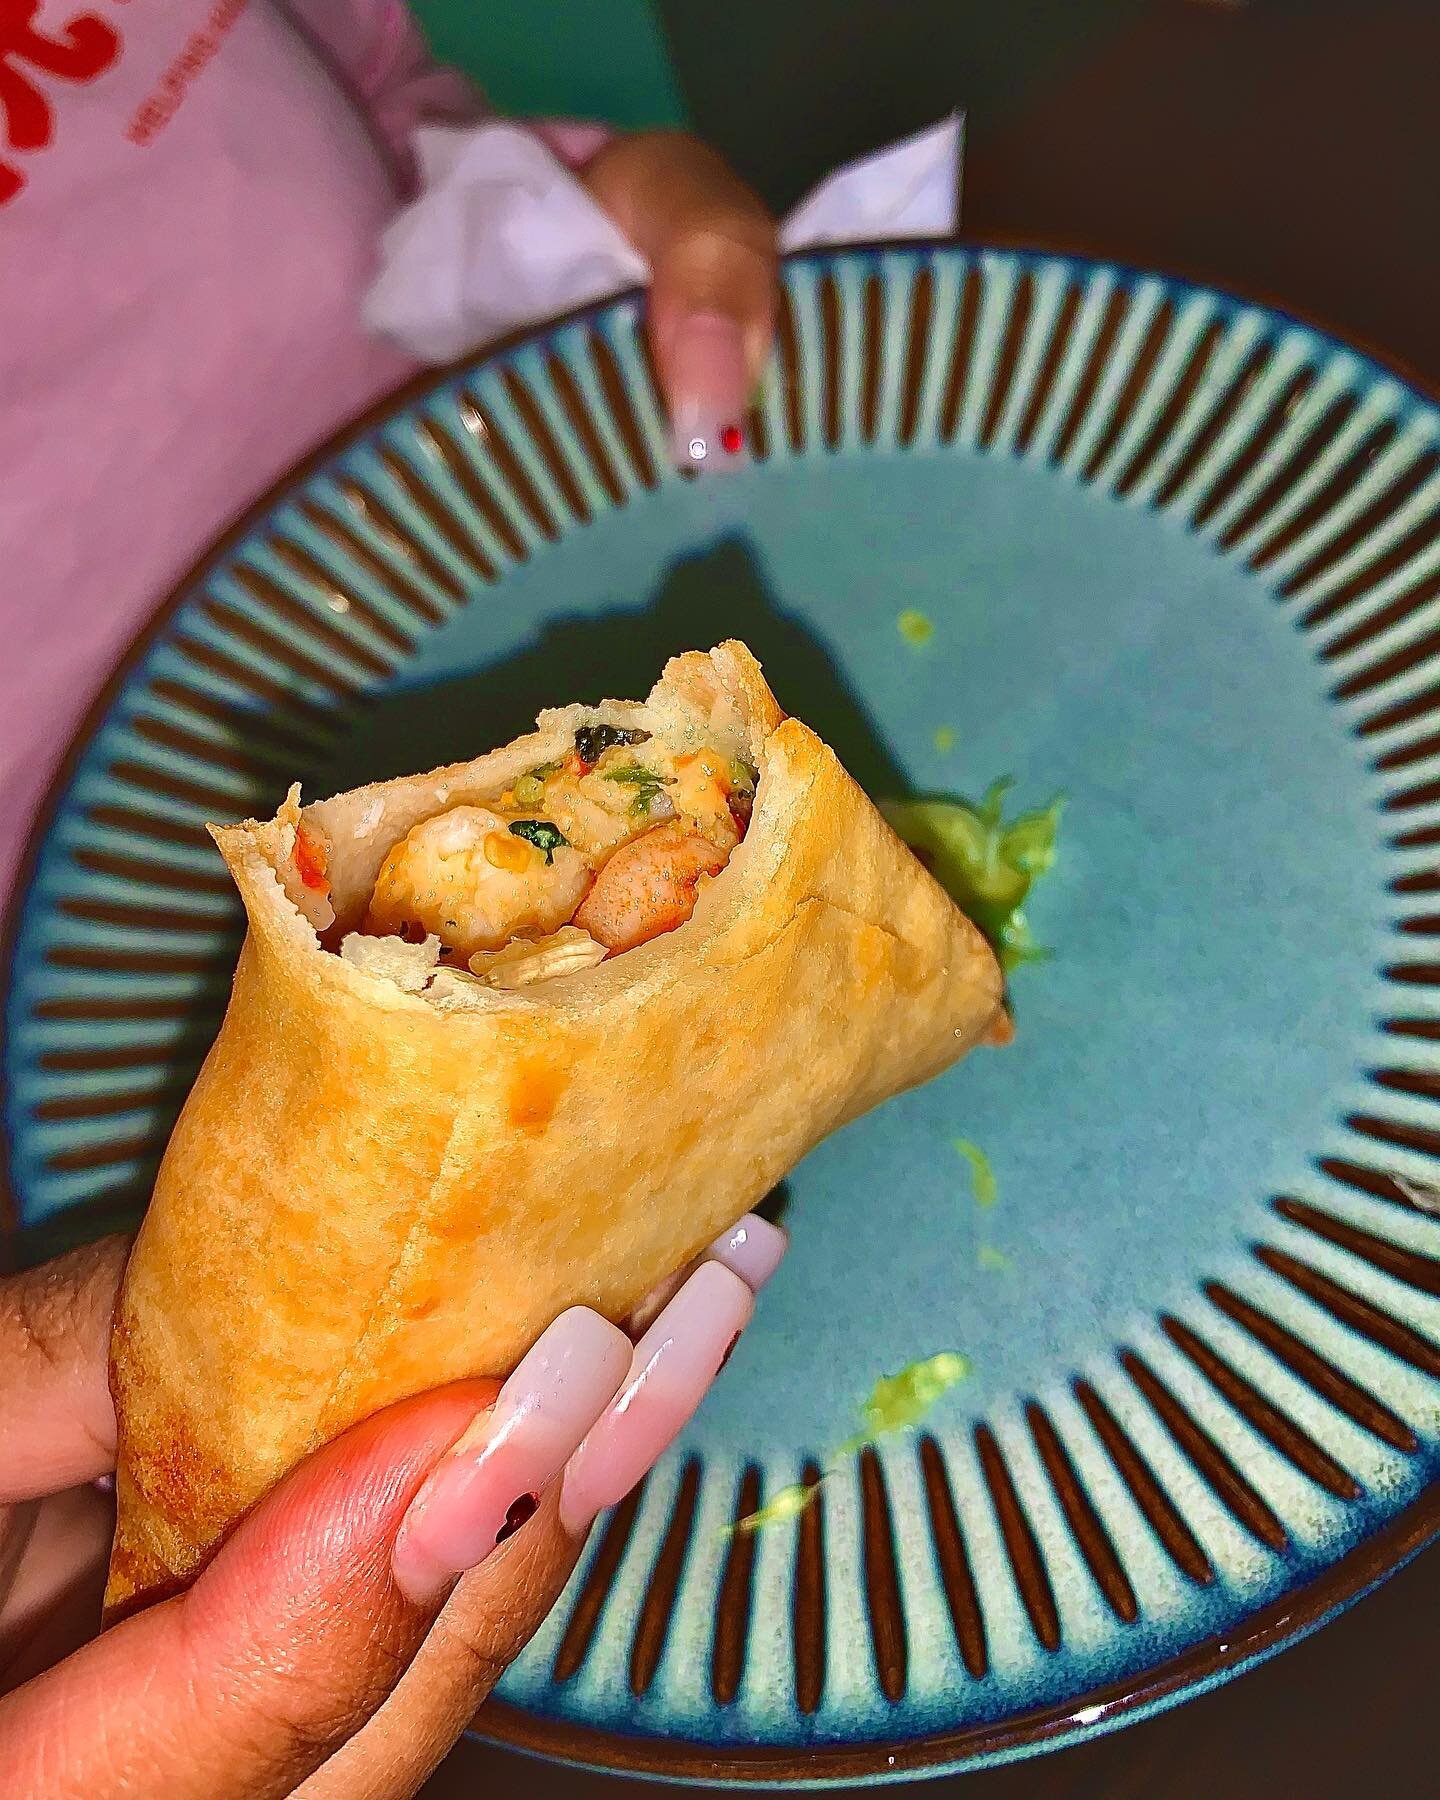 Sometimes staged shots don't give cuisine proper emotion. 

So here's a shot in our own home. We eat the Samosas just as much as y'all 🤣🤣. 

Select Shrimp Spicy for the win 😍🏁